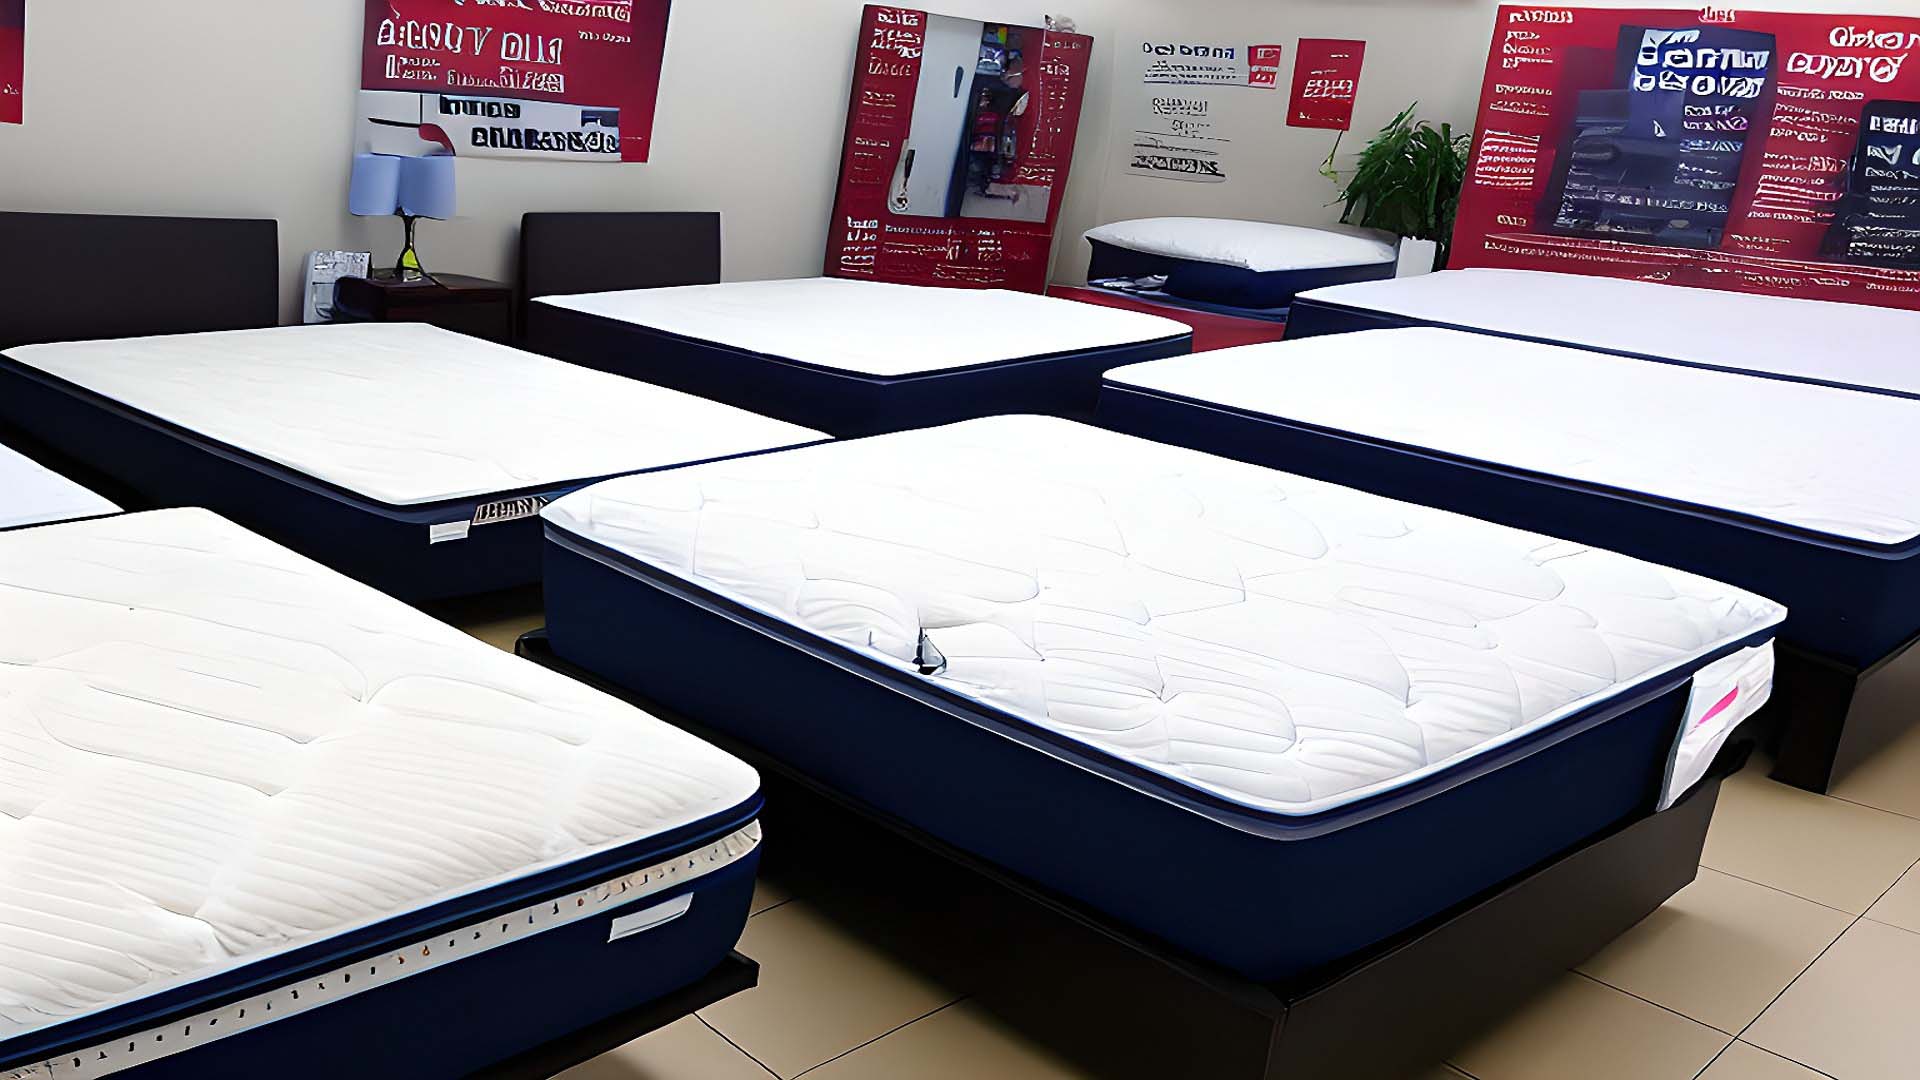 Mattress By Appointment in Hammond, Indiana 46320